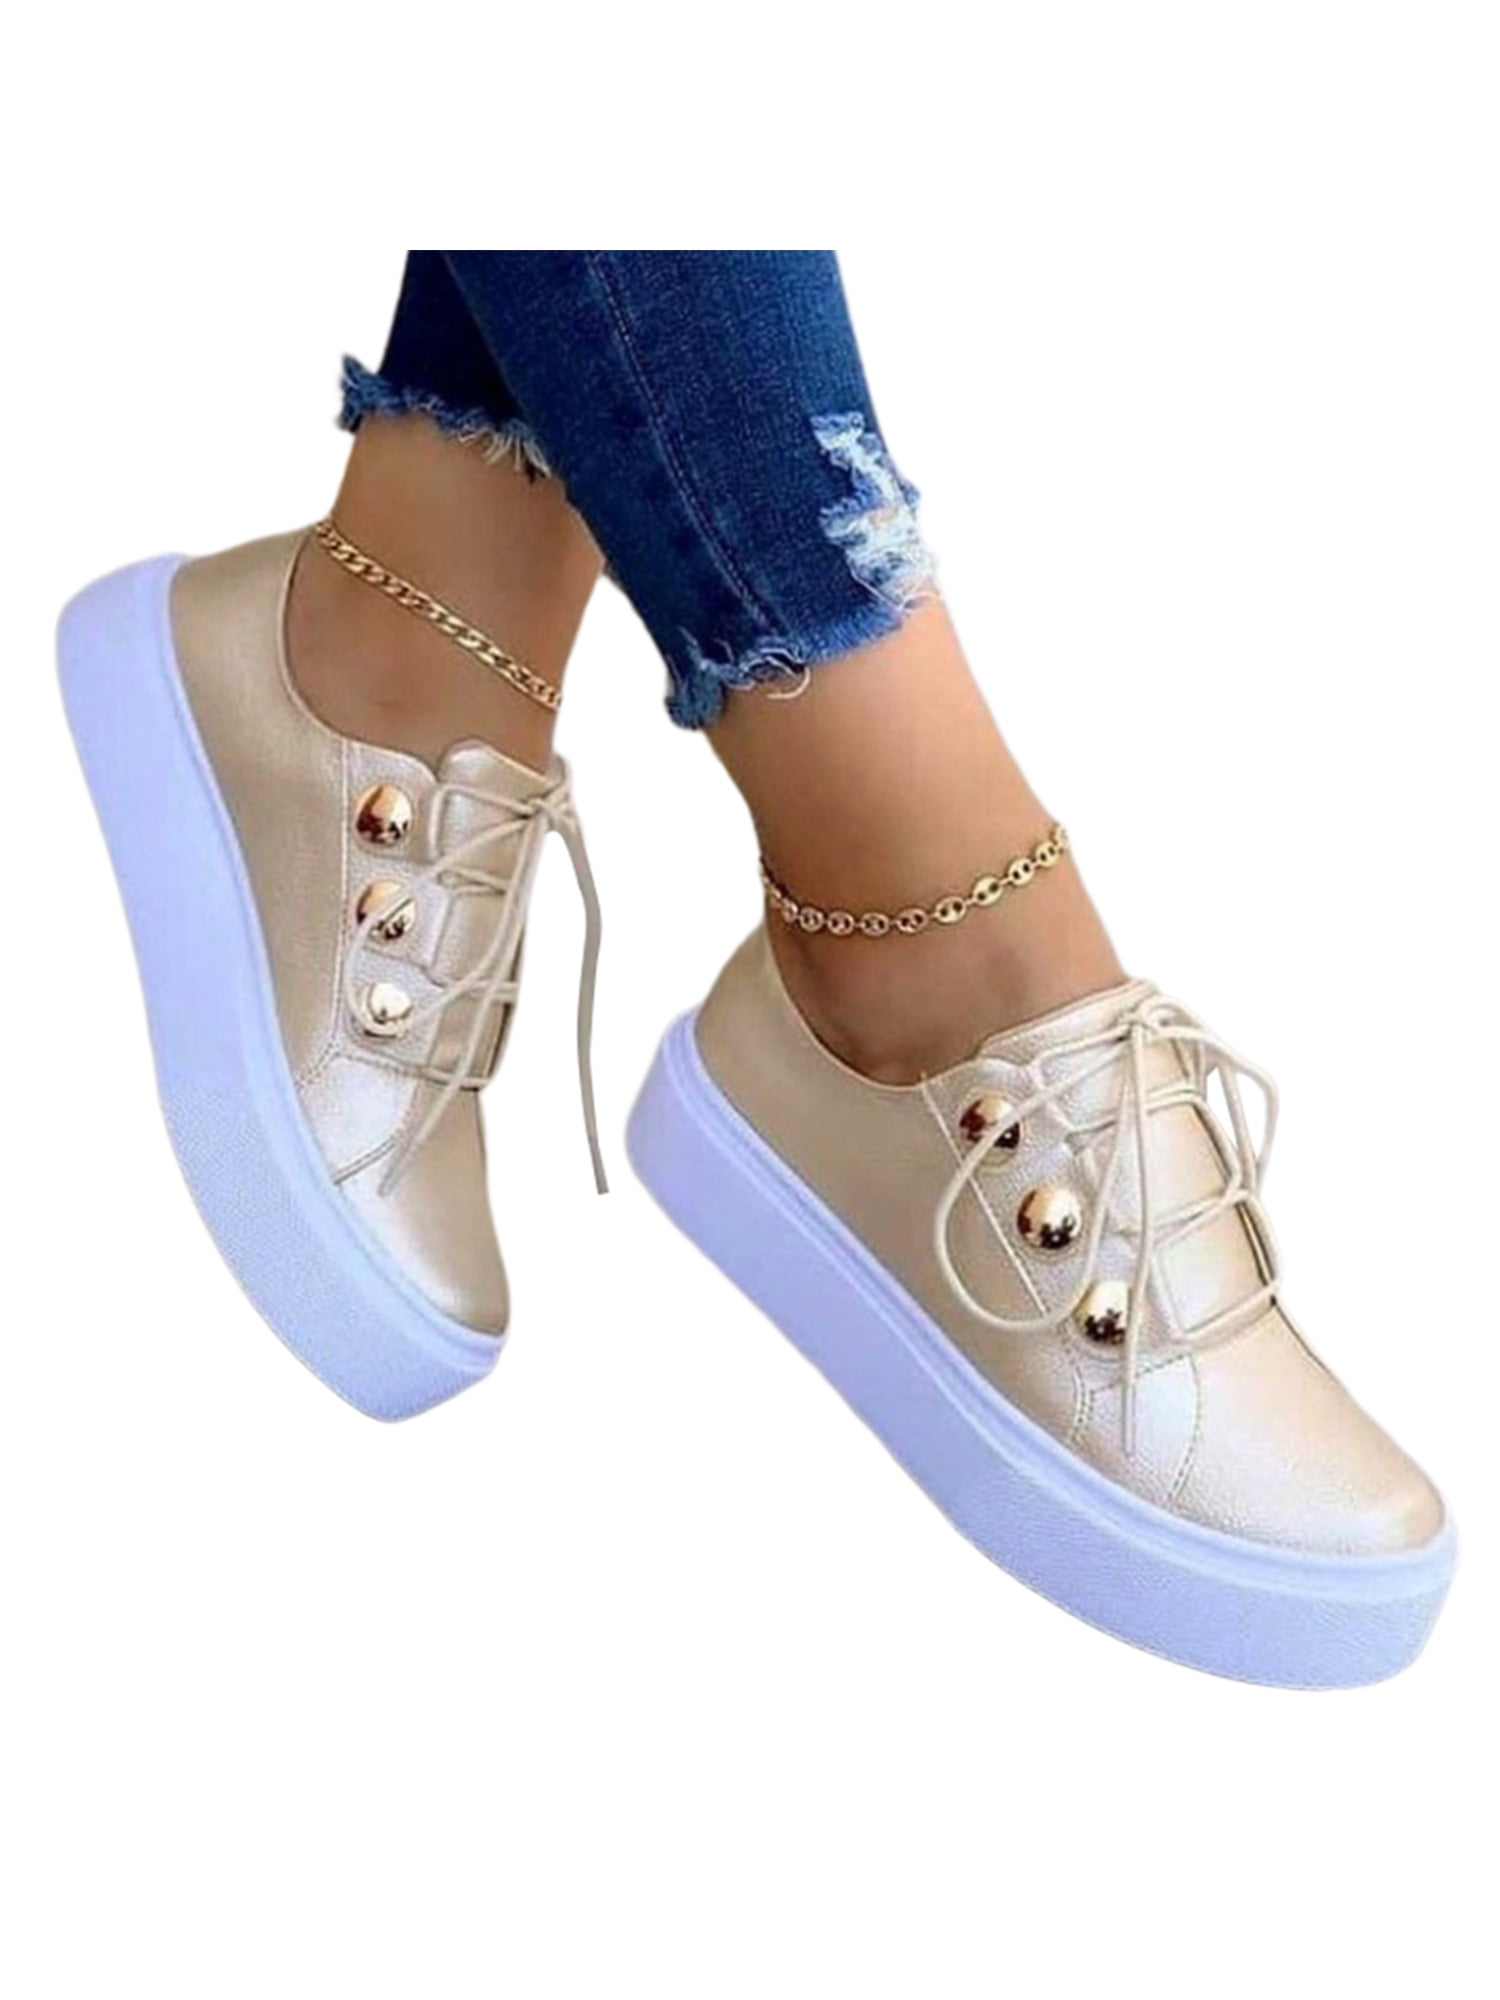 Gomelly Womens Flats Platform Skate Shoe Round Toe Sneakers Lightweight ...